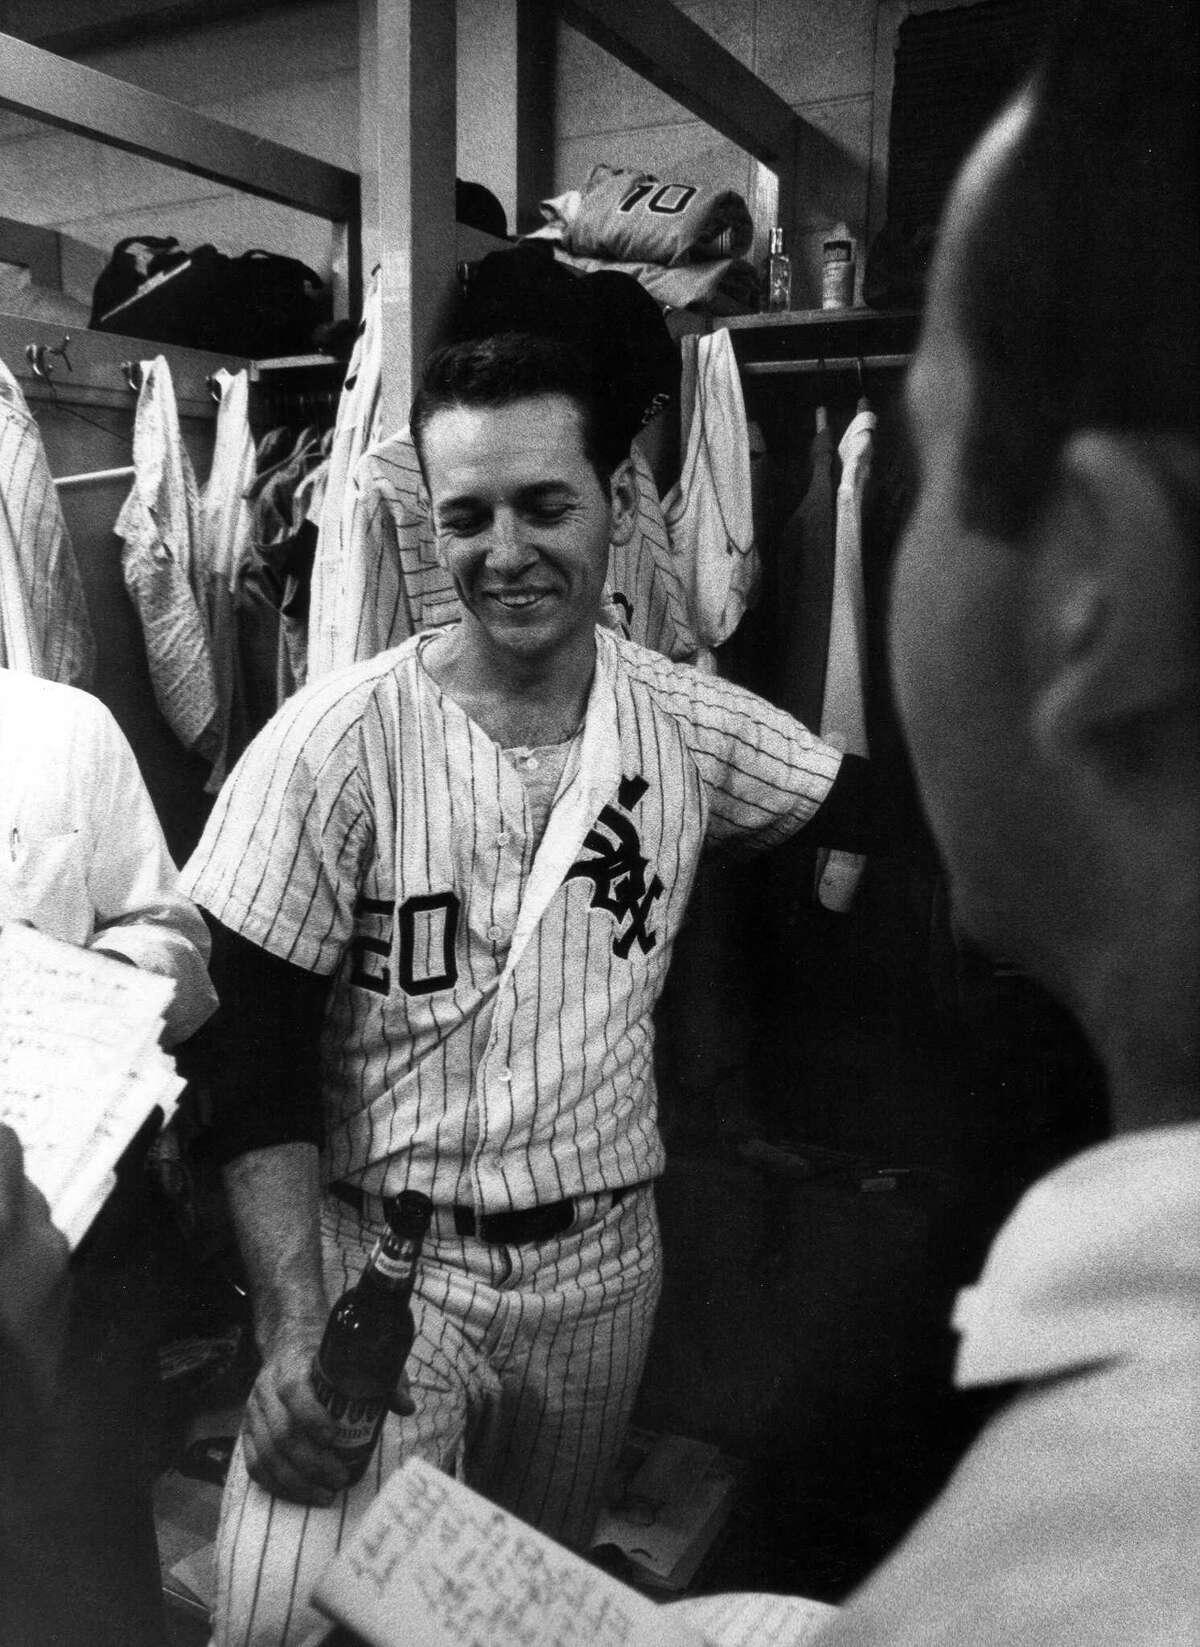 Joel Horlen, a stellar all-around athlete at Burbank, celebrates after he pitched a no-hitter for the Chicago White Sox in 1967.